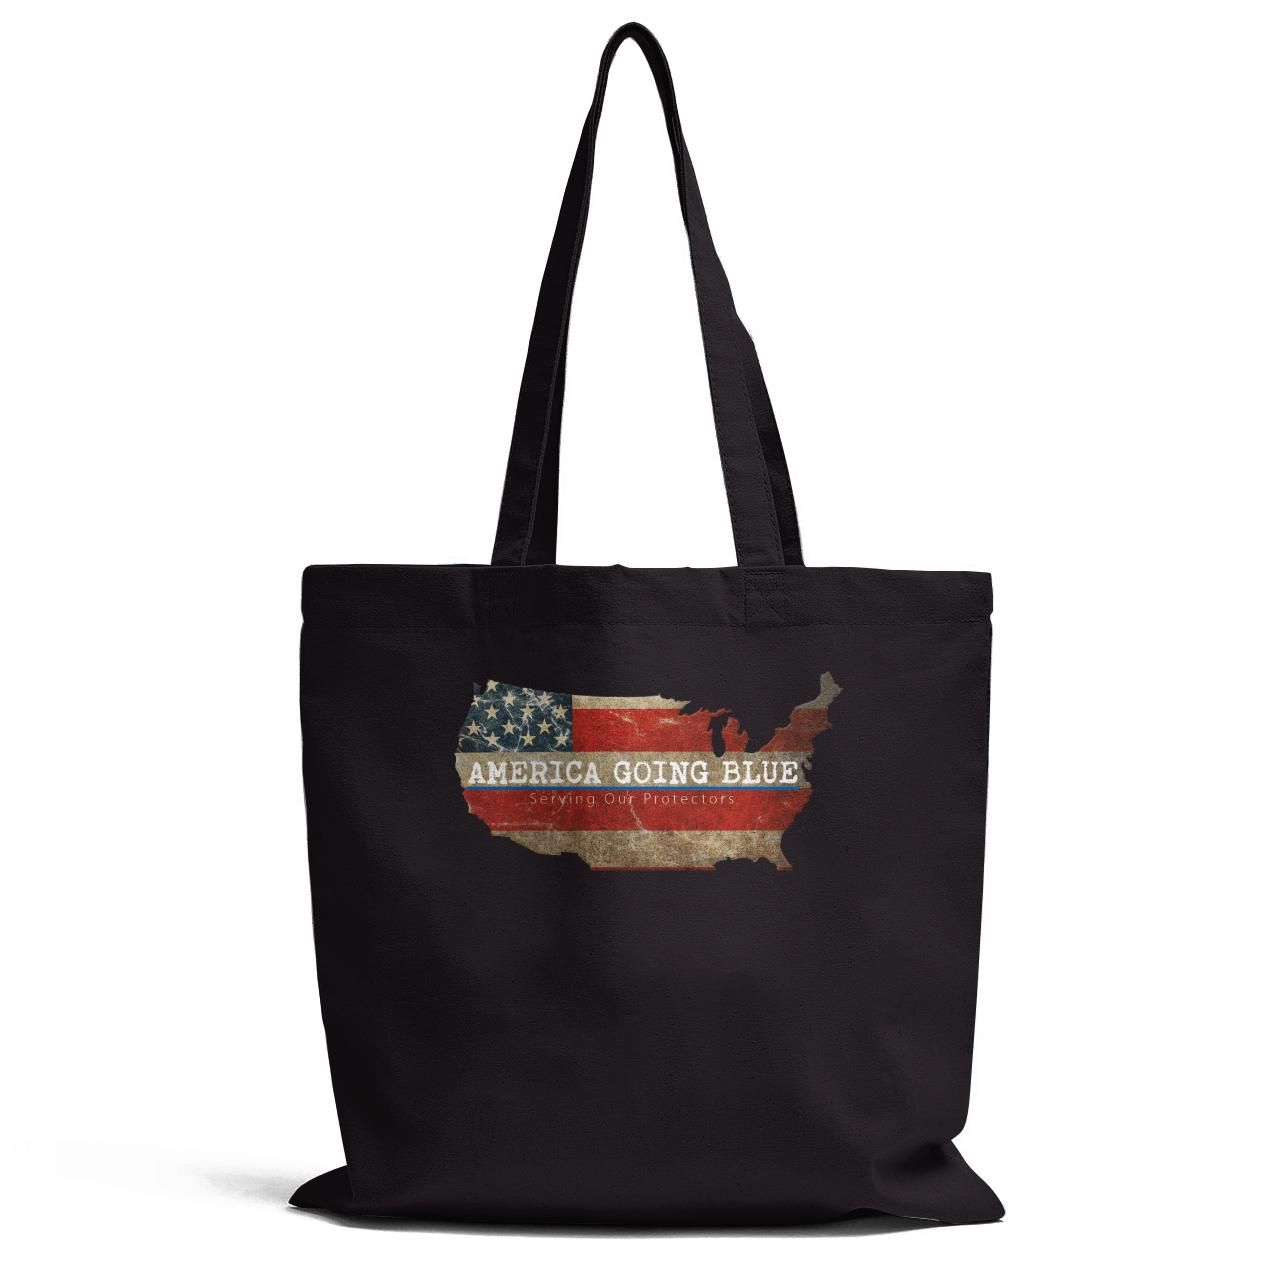 America Going Blue Serving Our Protectors Tote Bag